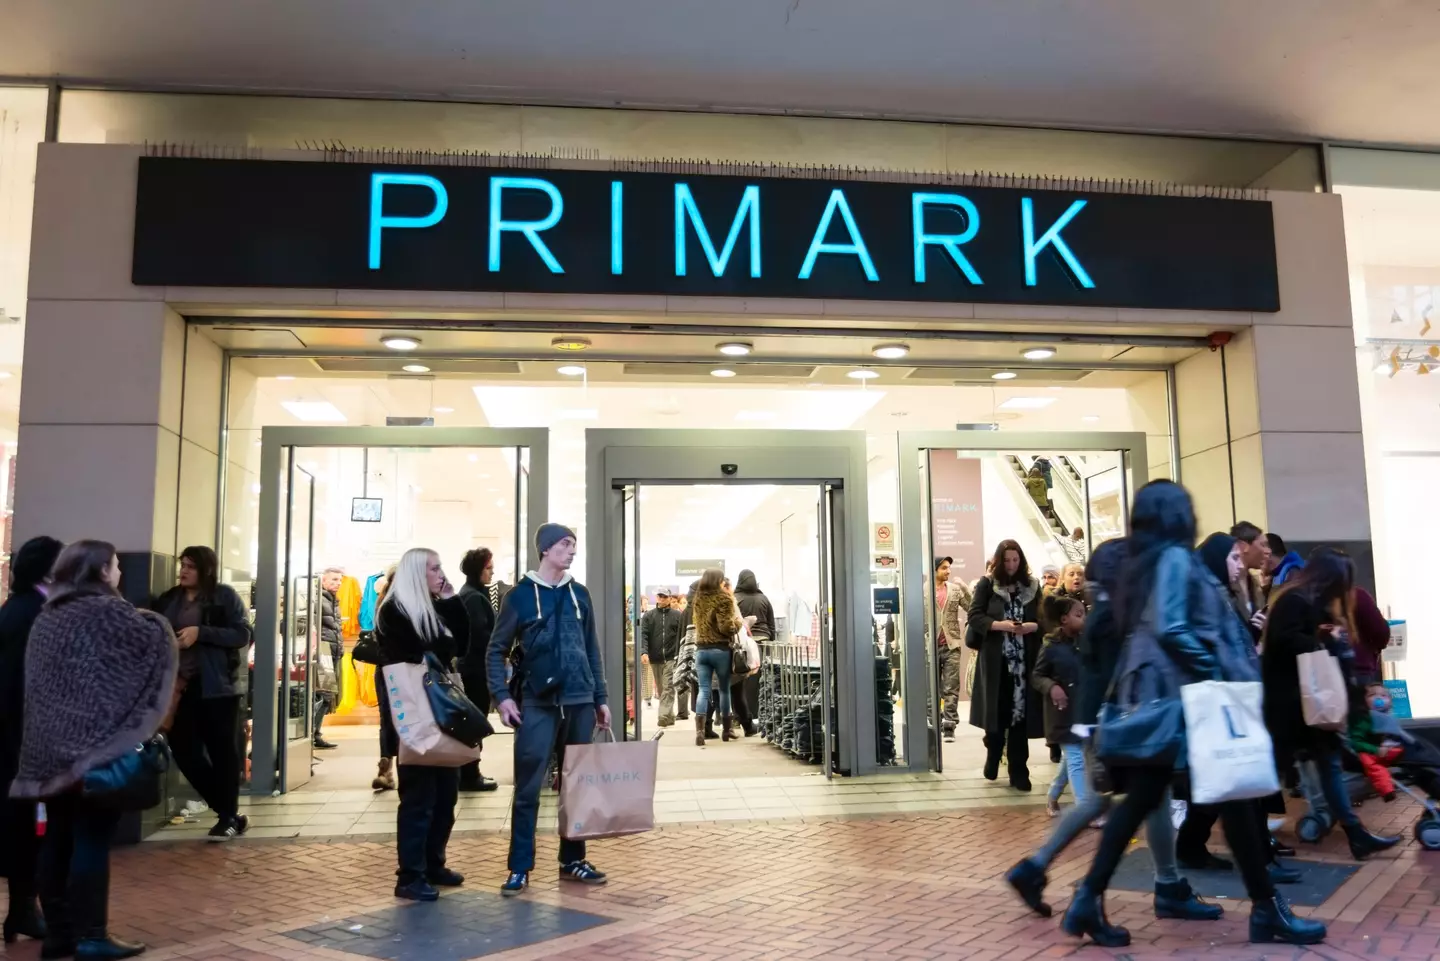 Primark now has self check-out tills in certain stores.